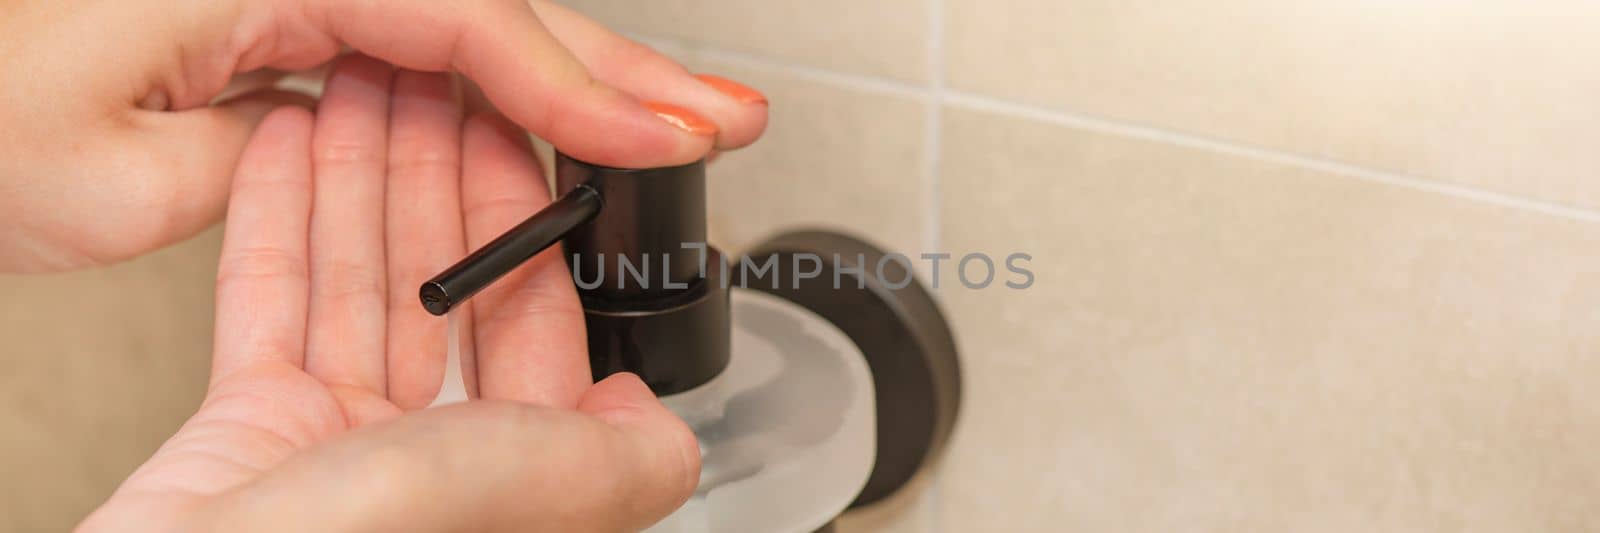 Washing and disinfecting hands, a woman uses liquid soap to wash her hands, in the bathroom, close-up. Place for text or copy space by SERSOL